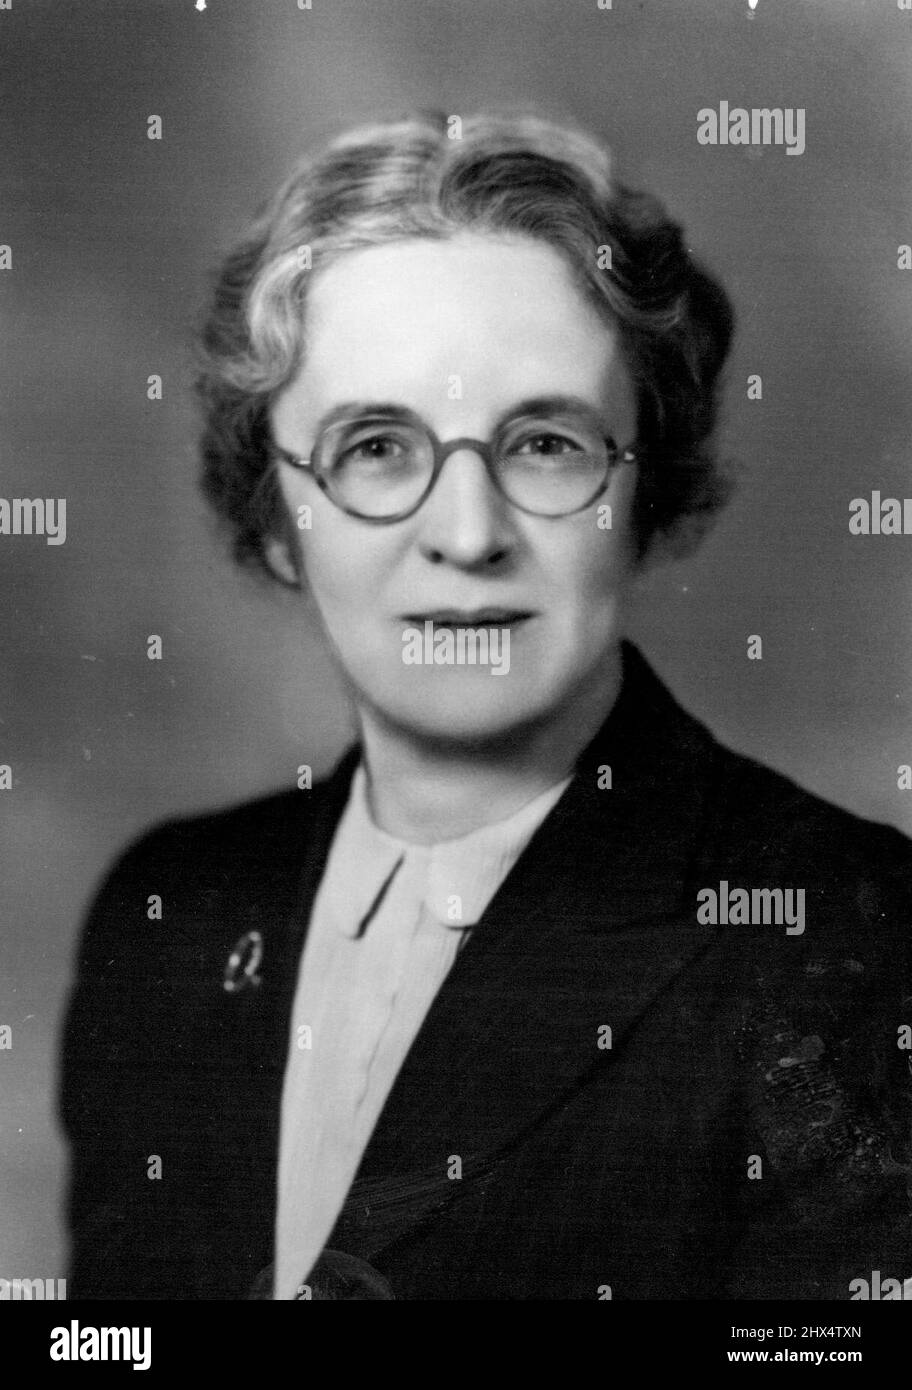 Mrs. D.R. Hall, formerly Miss Frances Perkins, whose marriage took place in London on March 22nd to The Hon. David R.Hall, former Attorney-General of New South Wales, and former Minister of Justice of Sydney, N.S.W. and of Portland Place, London. Mrs. Hall comes from Dunedin, New Zealand, and has lived in Malaya, and Ceylon. She is the elder daughter of the late Alexander Campbell ***** well-known Consulting Mining Engineer, of New Zealand & Malaya. June 25, 1944. (Photo by Pearl Freeman). Stock Photo